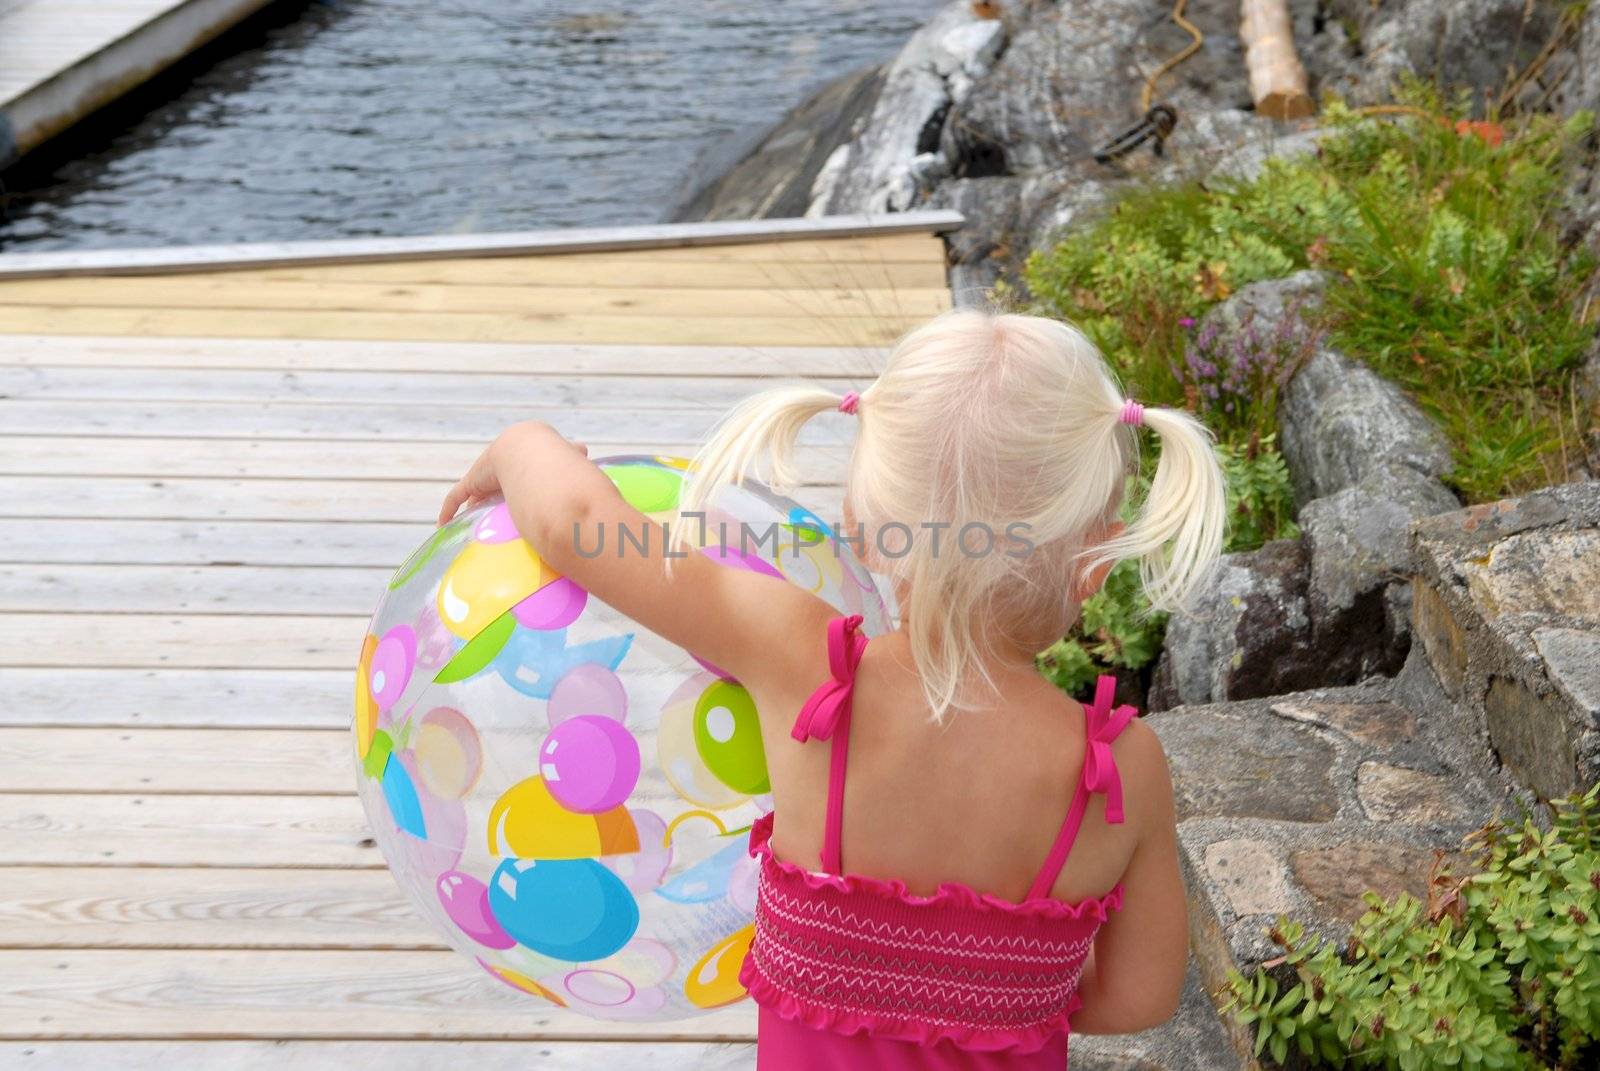 girl holding a balloon. Please note: No negative use allowed.